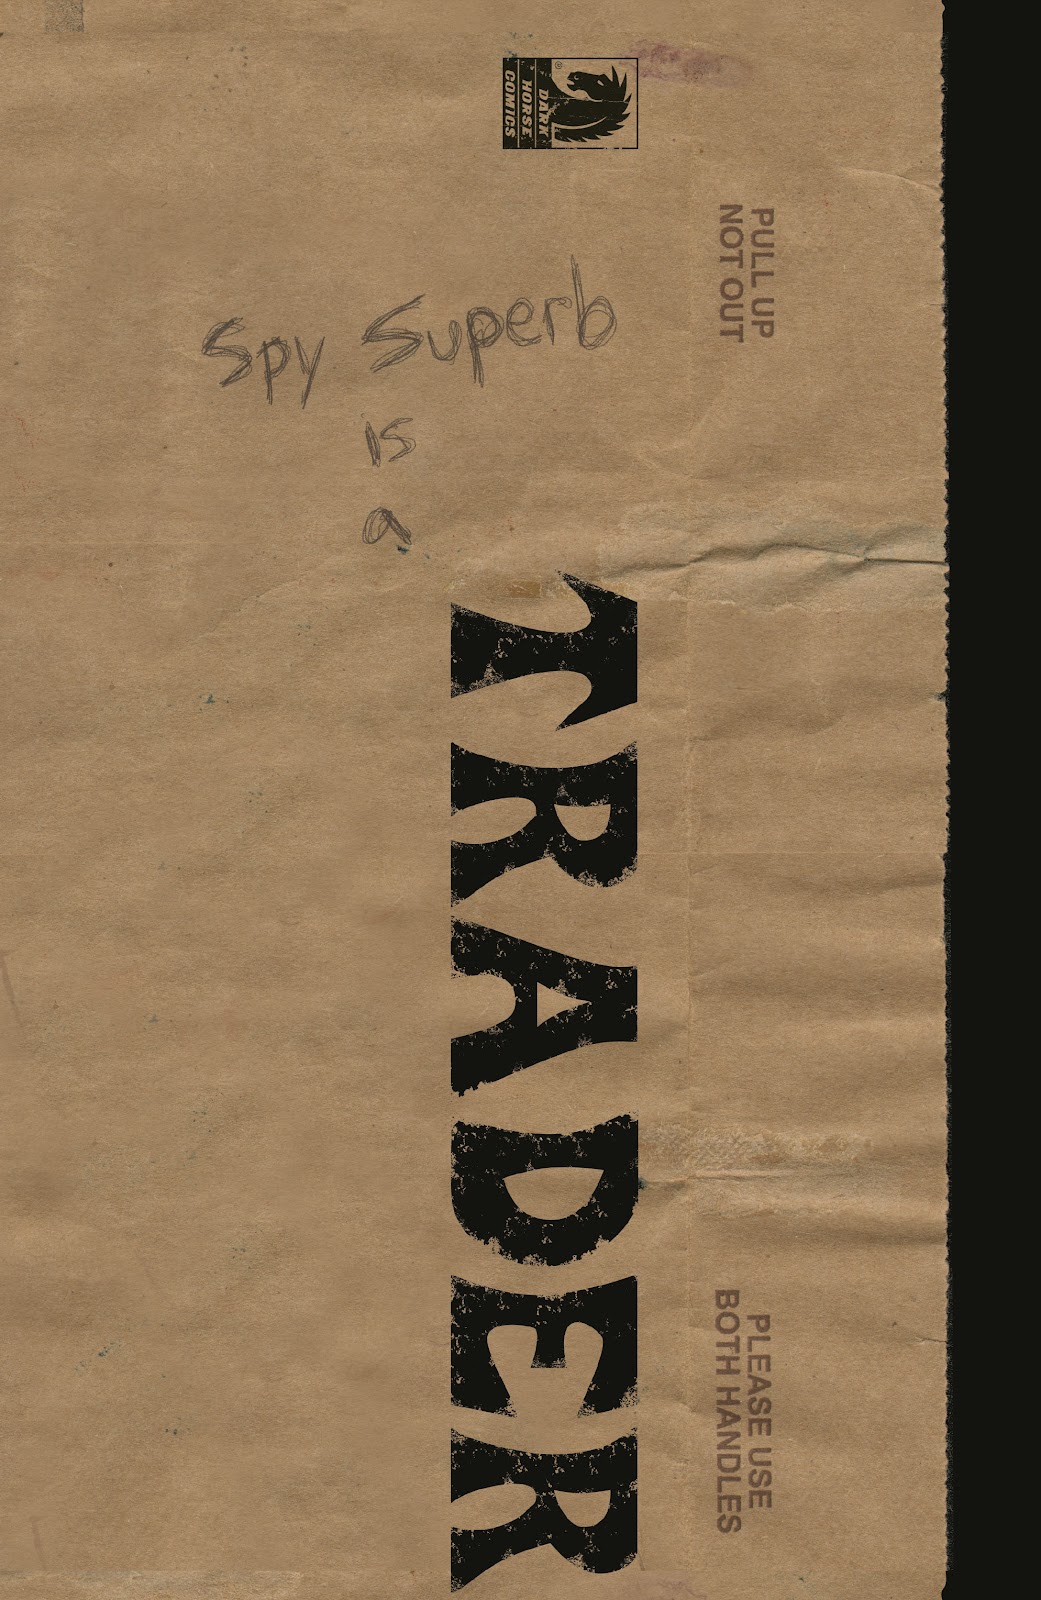 Spy Superb issue 1 - Page 1